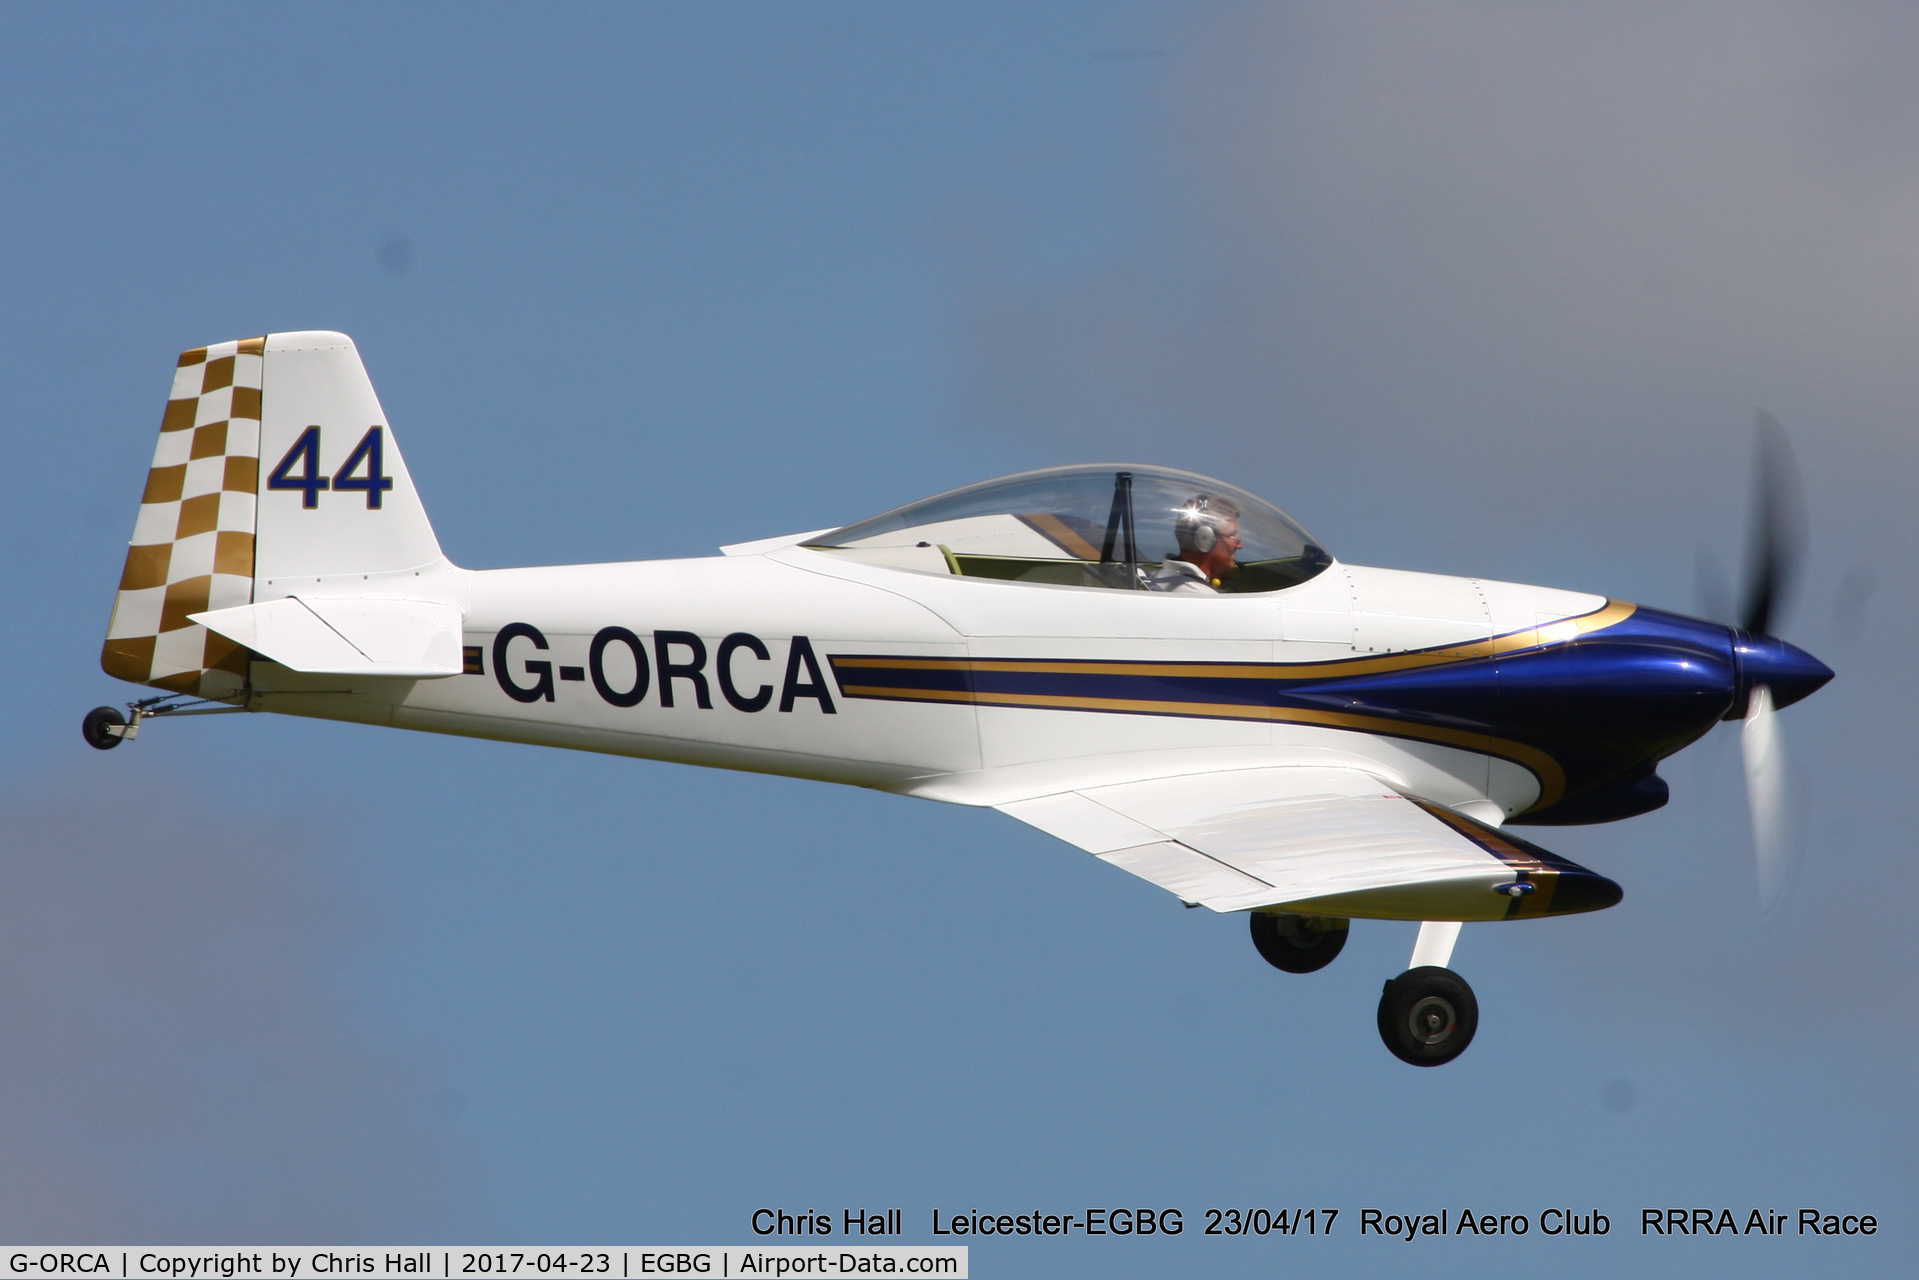 G-ORCA, 2005 Vans RV-4 C/N PFA 181-12924, Royal Aero Club 3R's air race at Leicester